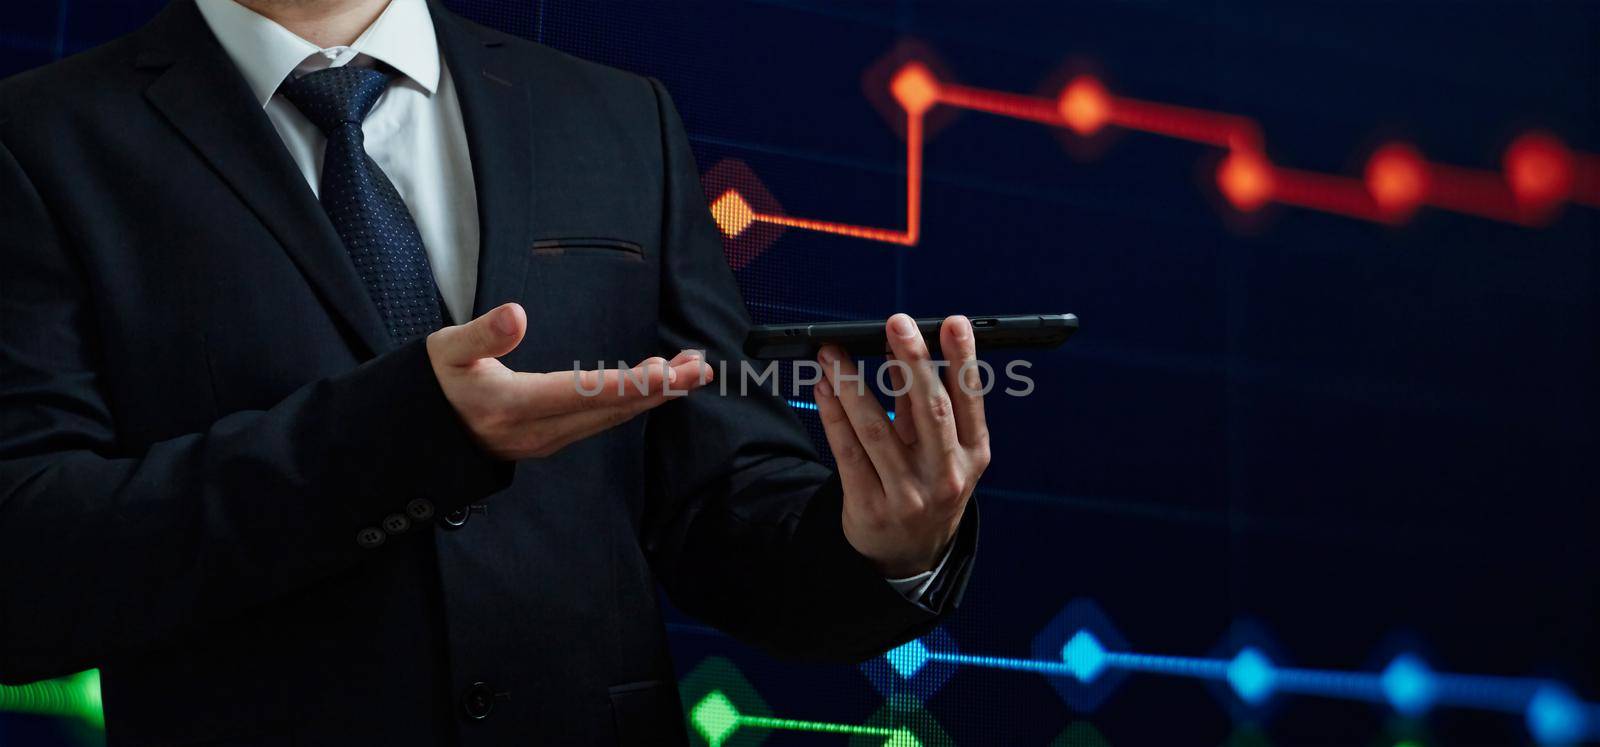 Stock market, Business growth, progress or success concept. Businessman or trader is showing a growing virtual hologram stock, invest in trading. by Maximusnd